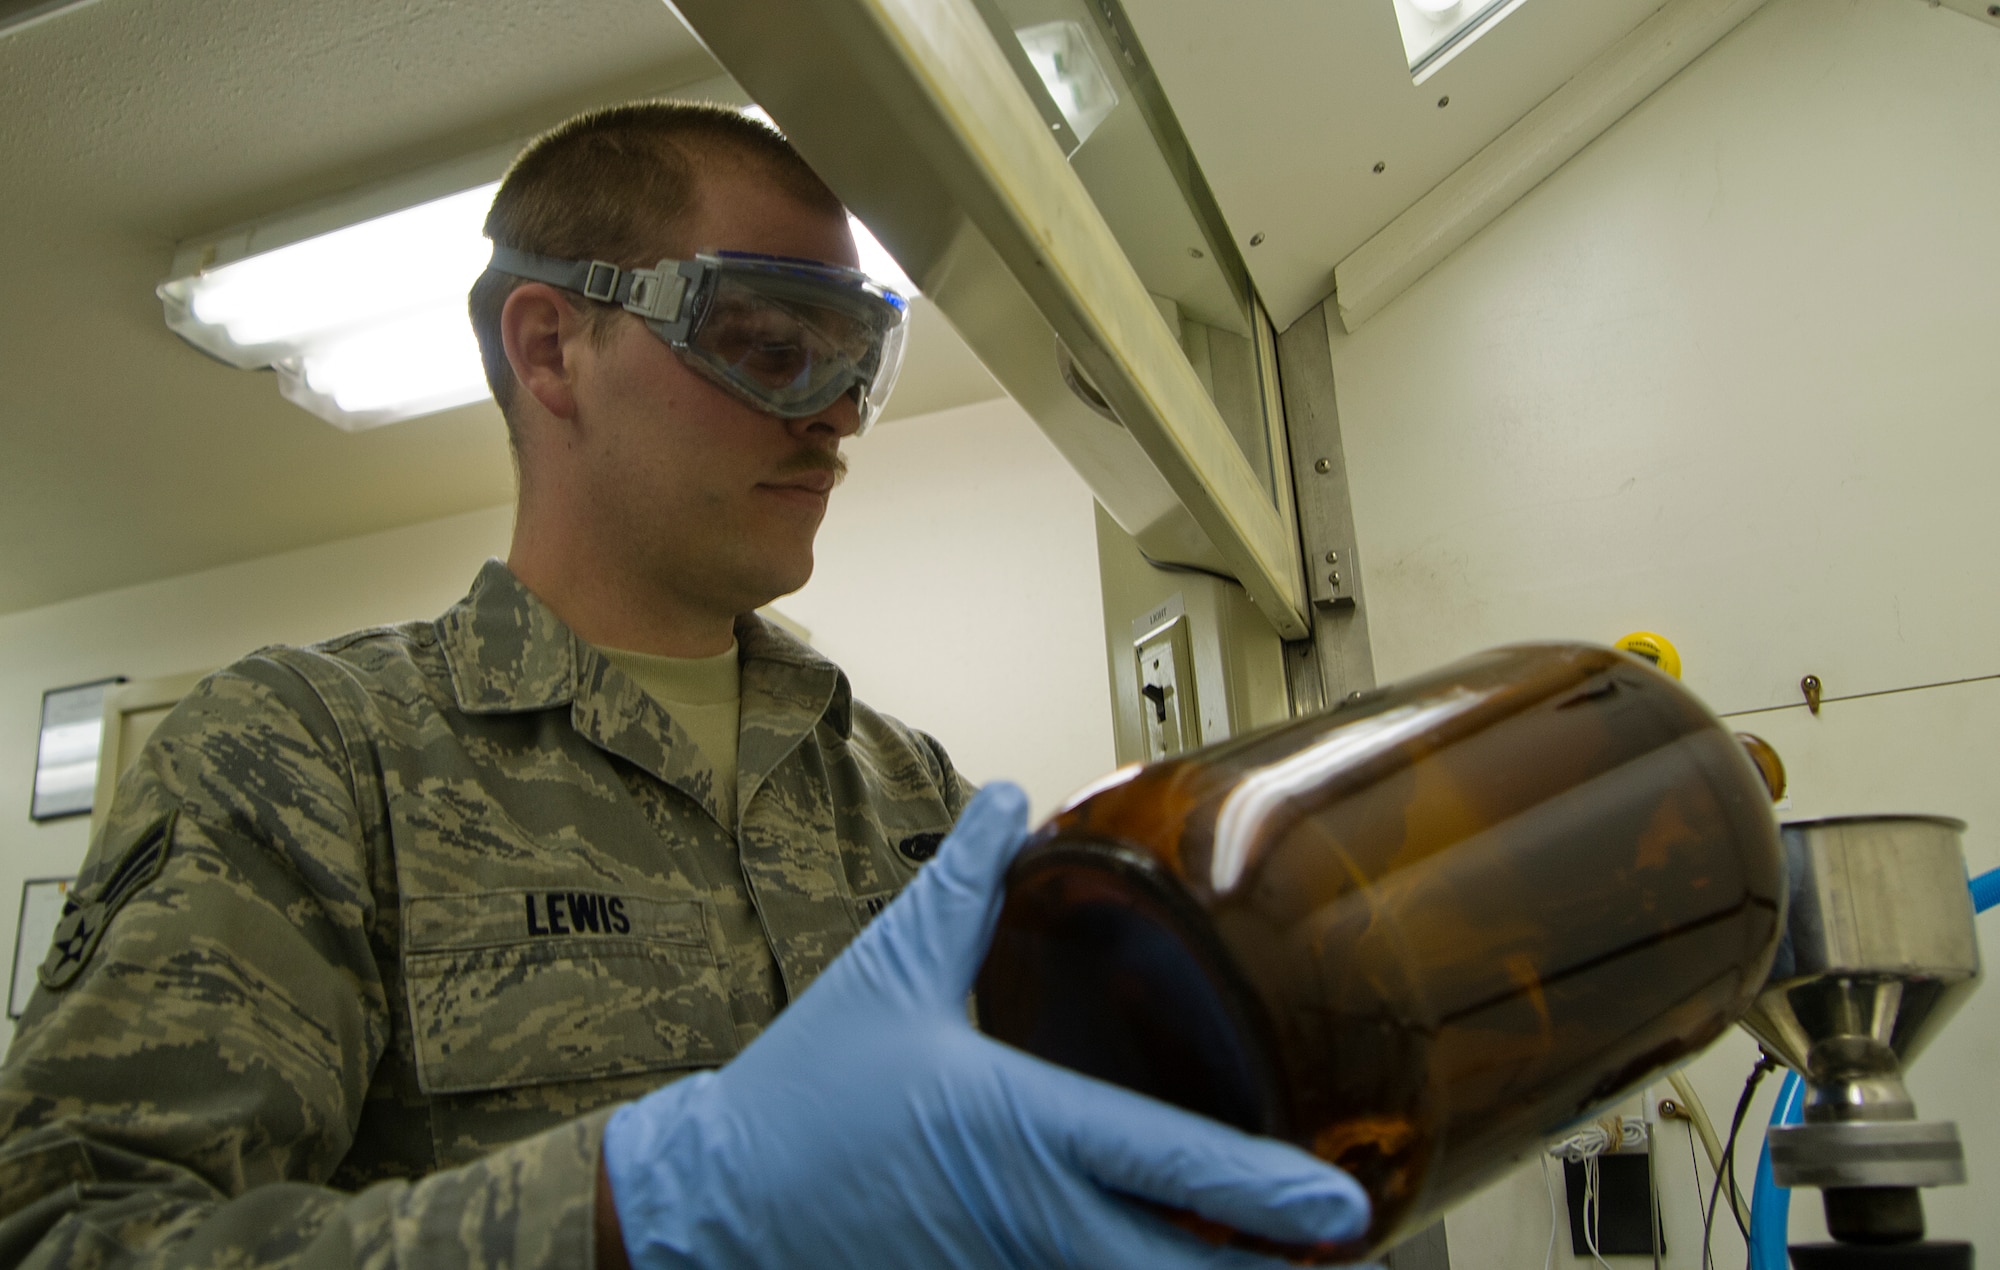 Senior Airman Nathan Lewis, 673d Logistics Readiness Squadron Petroleum, Oil, Lubricants shop laboratory technician and native of Roseburg, Ore., demonstrates how to test fuel before it is put into an aircraft on Joint Base Elmendorf-Richardson March 30, 2012. The laboratory technicians ensure the fuel is safe before it enters an aircraft to make sure it won't give the pilot any problems. (U.S. Air Force photo/Staff Sgt. Zachary Wolf)